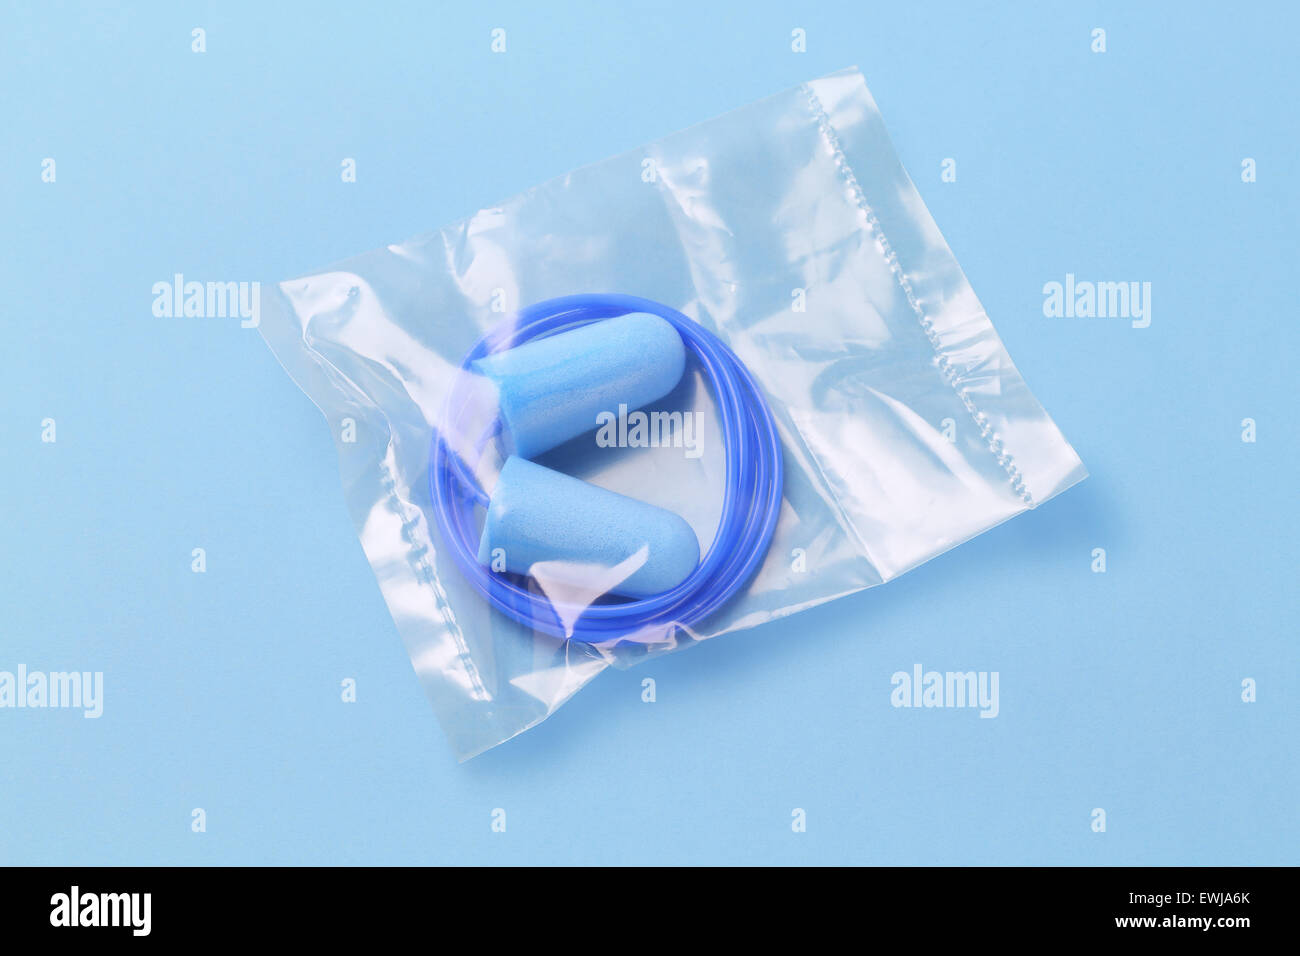 Ear Plugs in Sealed Plastic Bag on Blue Background Stock Photo